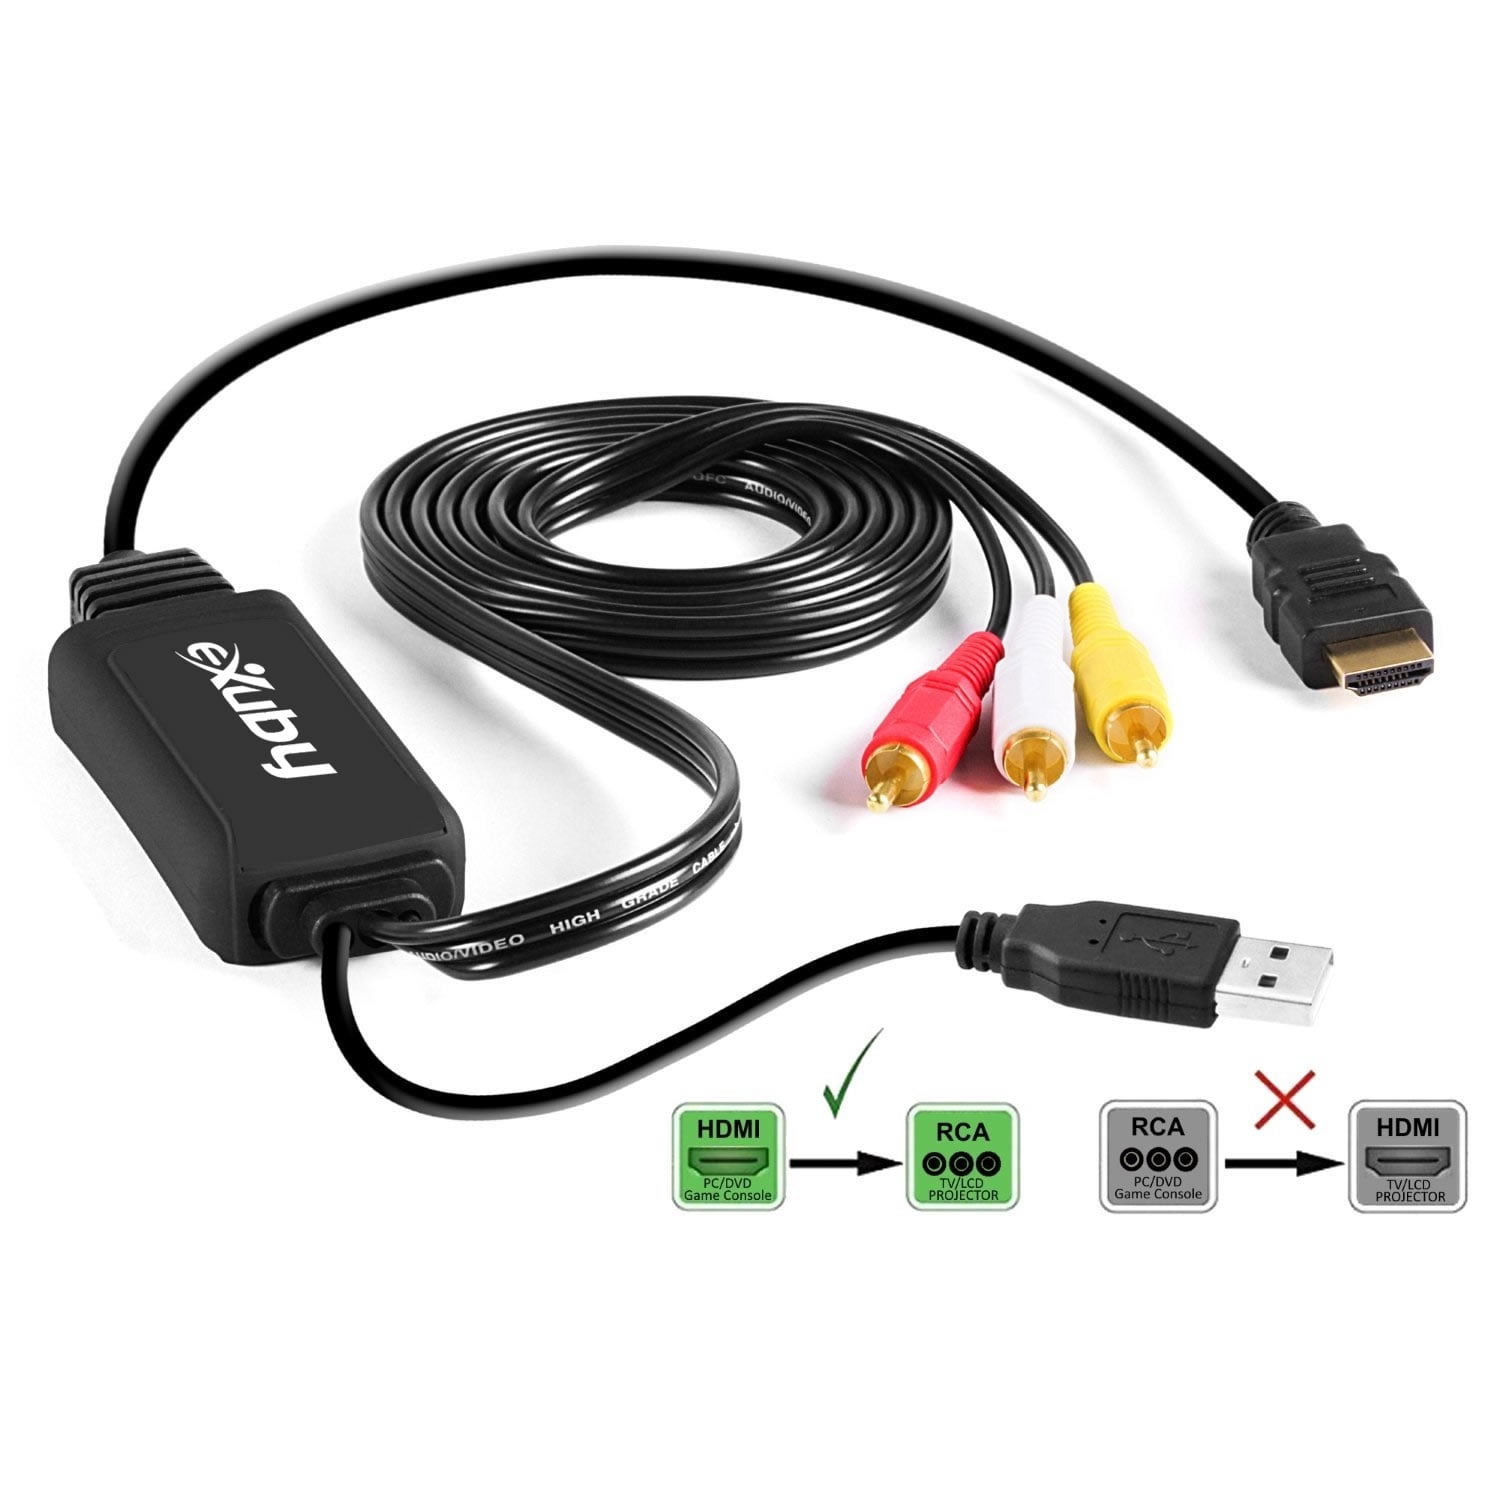 Isimple ISHD01 MediaLinx HDMI to Composite RCA A/V Cable 4ft 